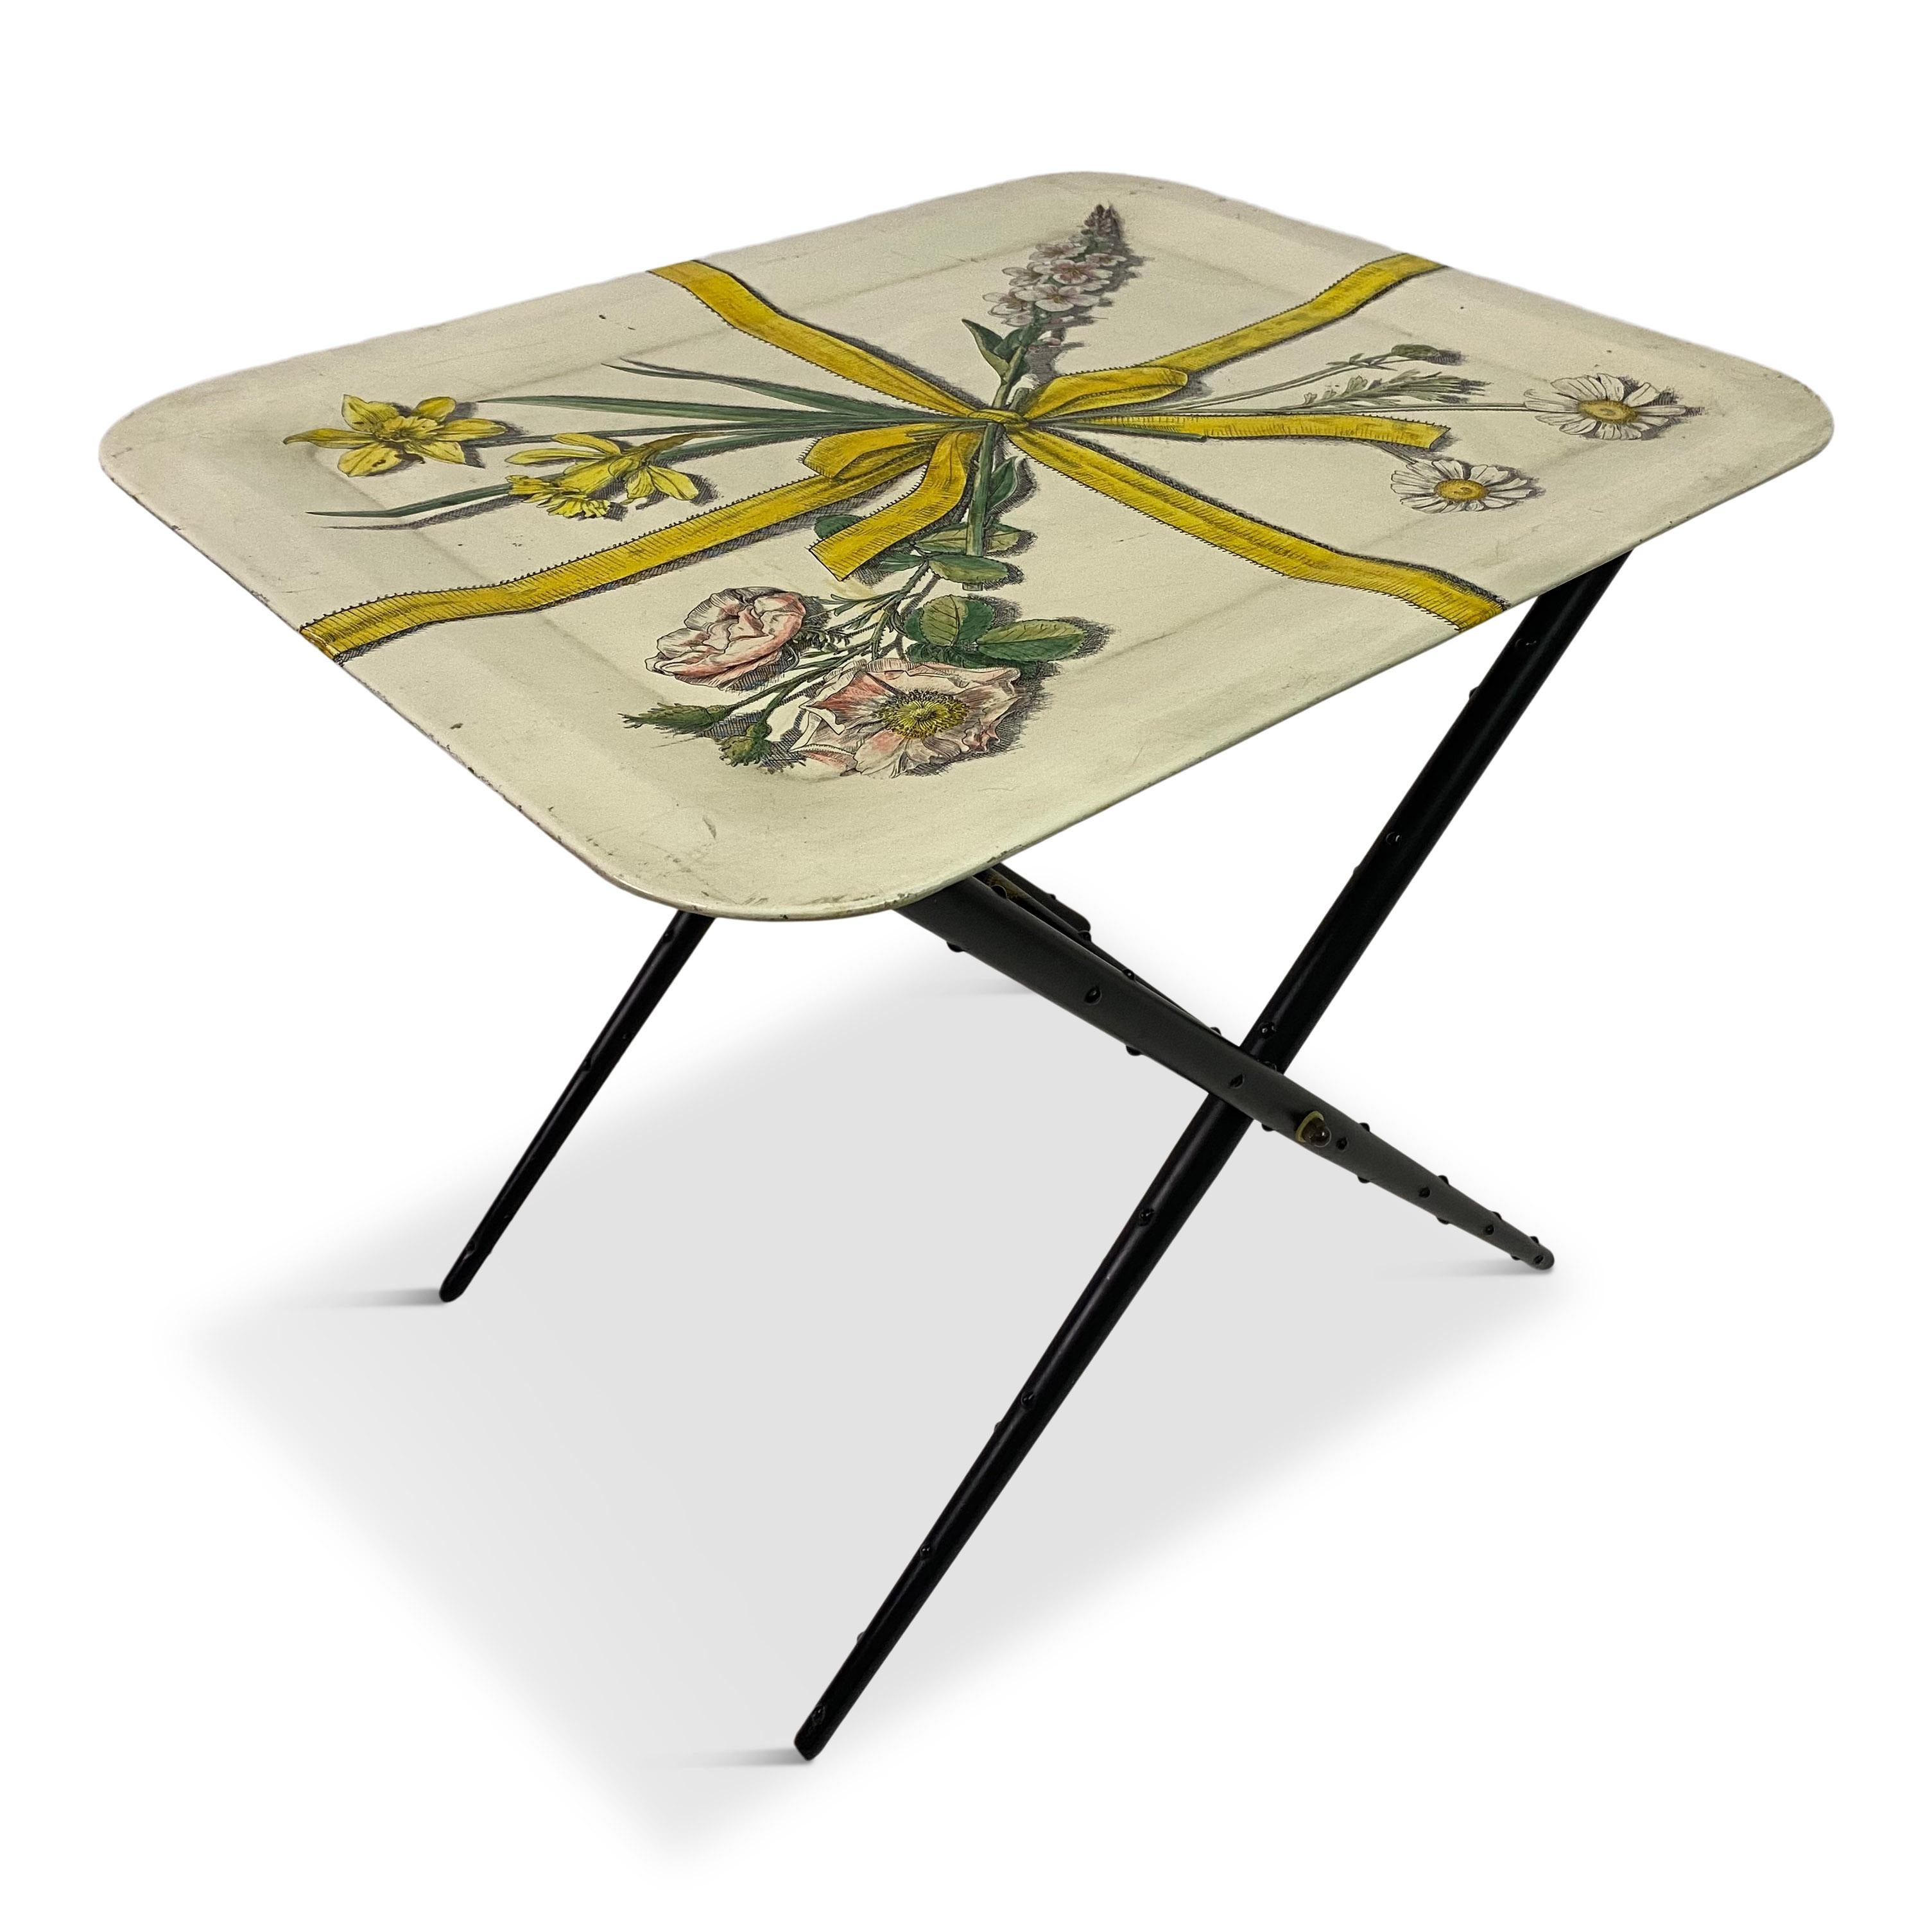 Tray table

By Fornasetti Milano

Lithographically decorated

Enamelled steel

Flower and bow images

Folding black stand

Tray and stand with Fornasetti labels

Italy 1960s.